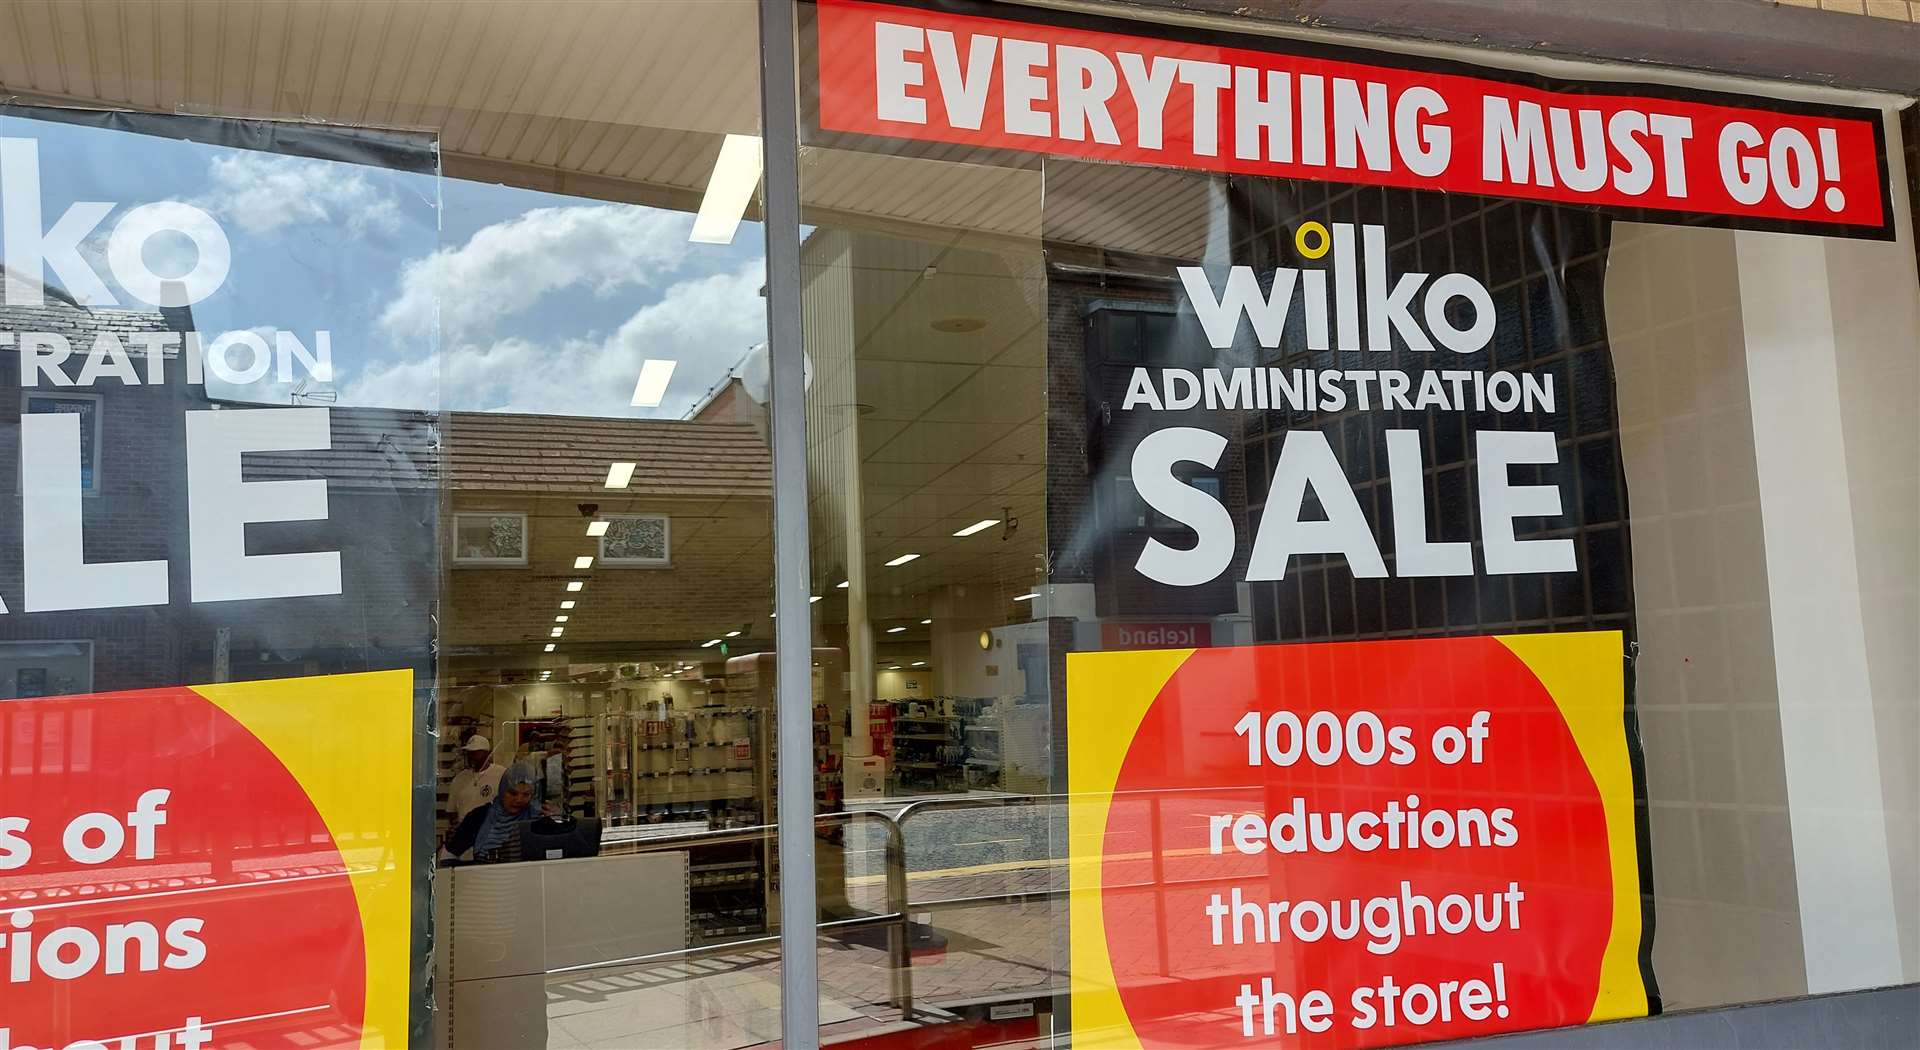 An ‘everything must go’ sale has been launched at Wilko